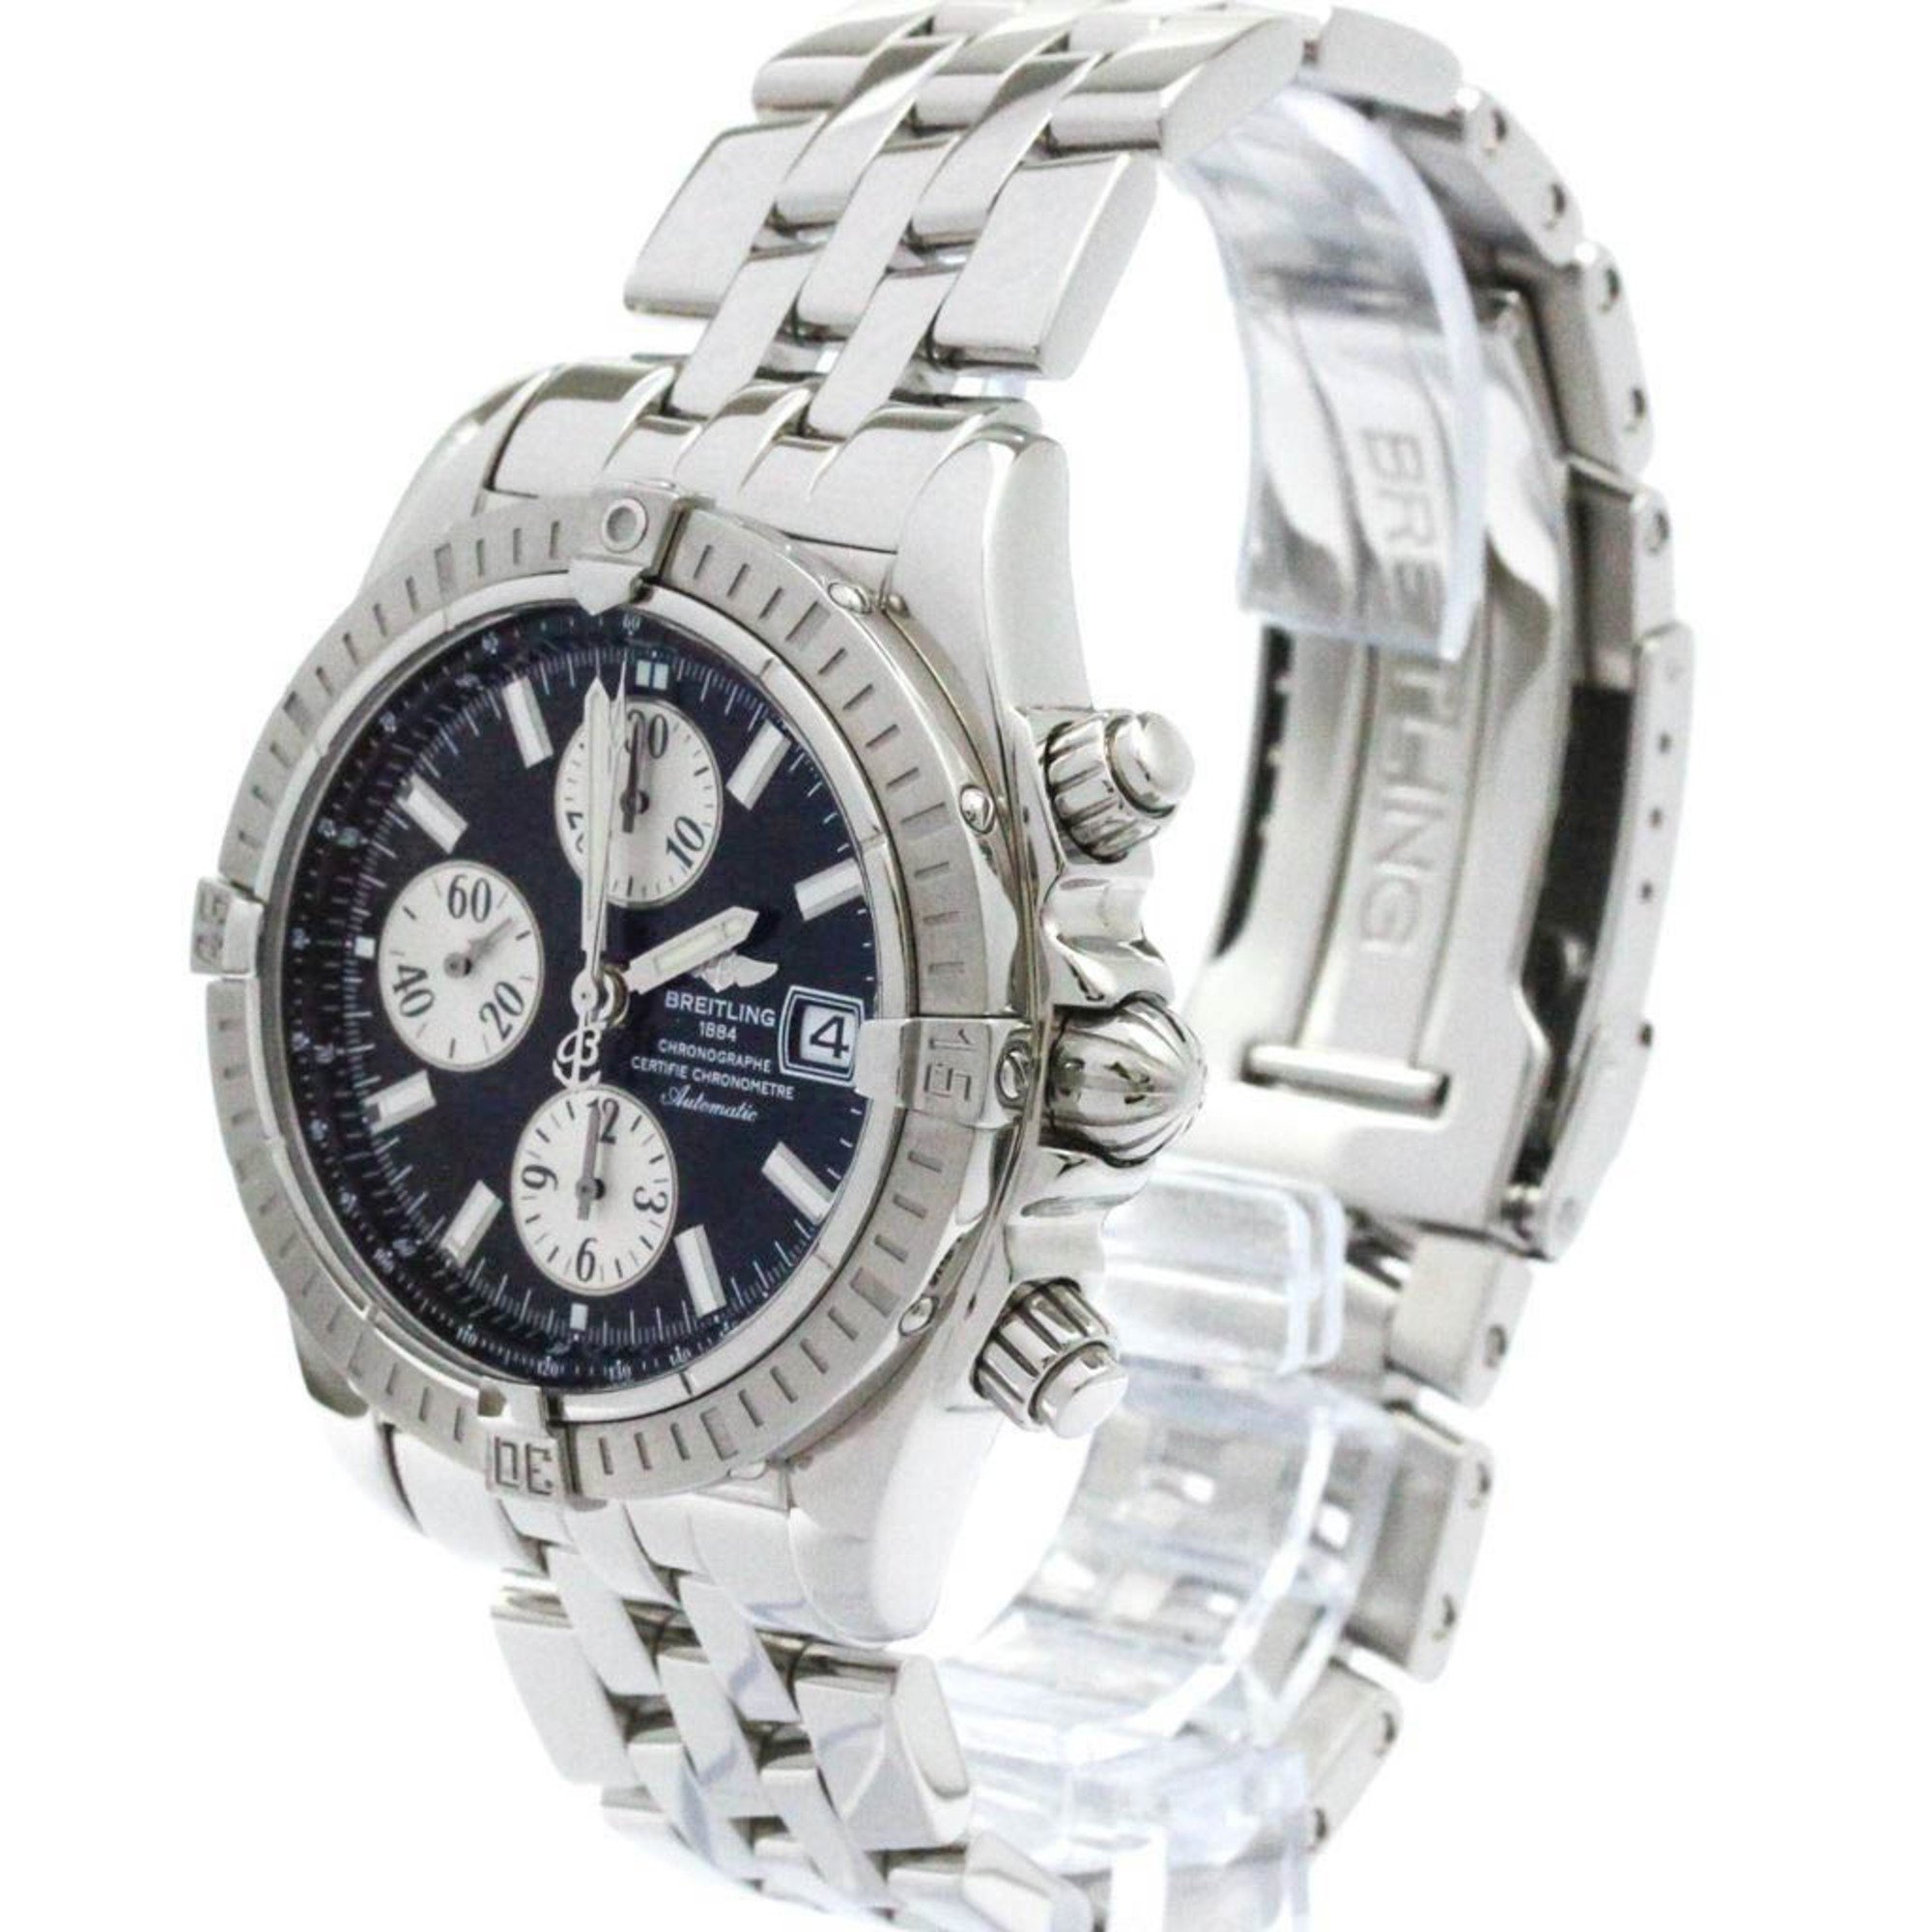 Polished BREITLING Chronomat Evolution Steel Automatic Watch A13356 BF572582